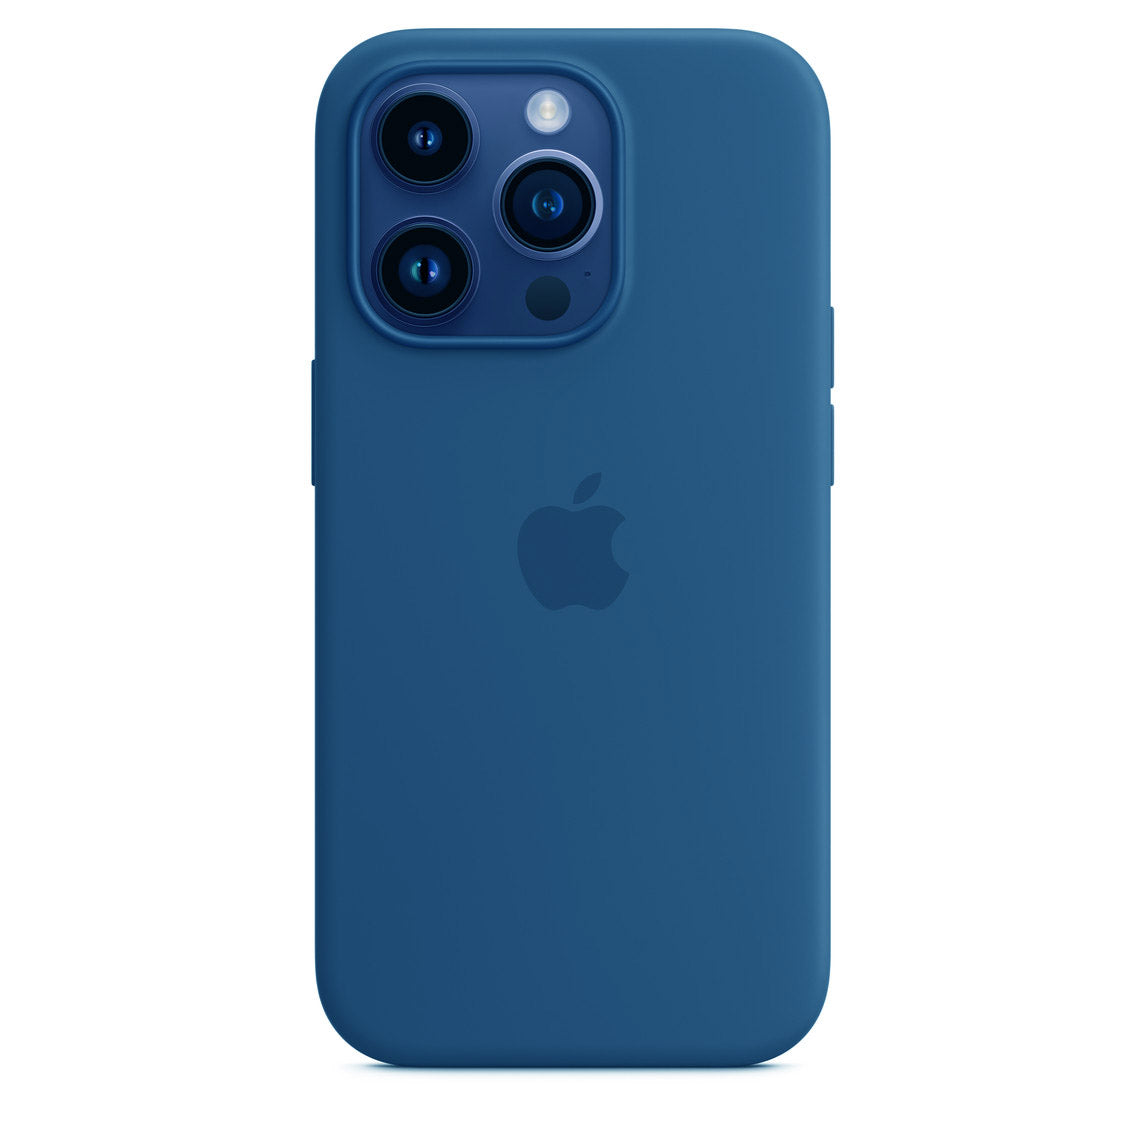 iPhone 14 Silicone Cover with Mag-Safe Apple Original Silicone Case with Mag-Safe For Apple iPhone 14 with Mag-Safe Blue